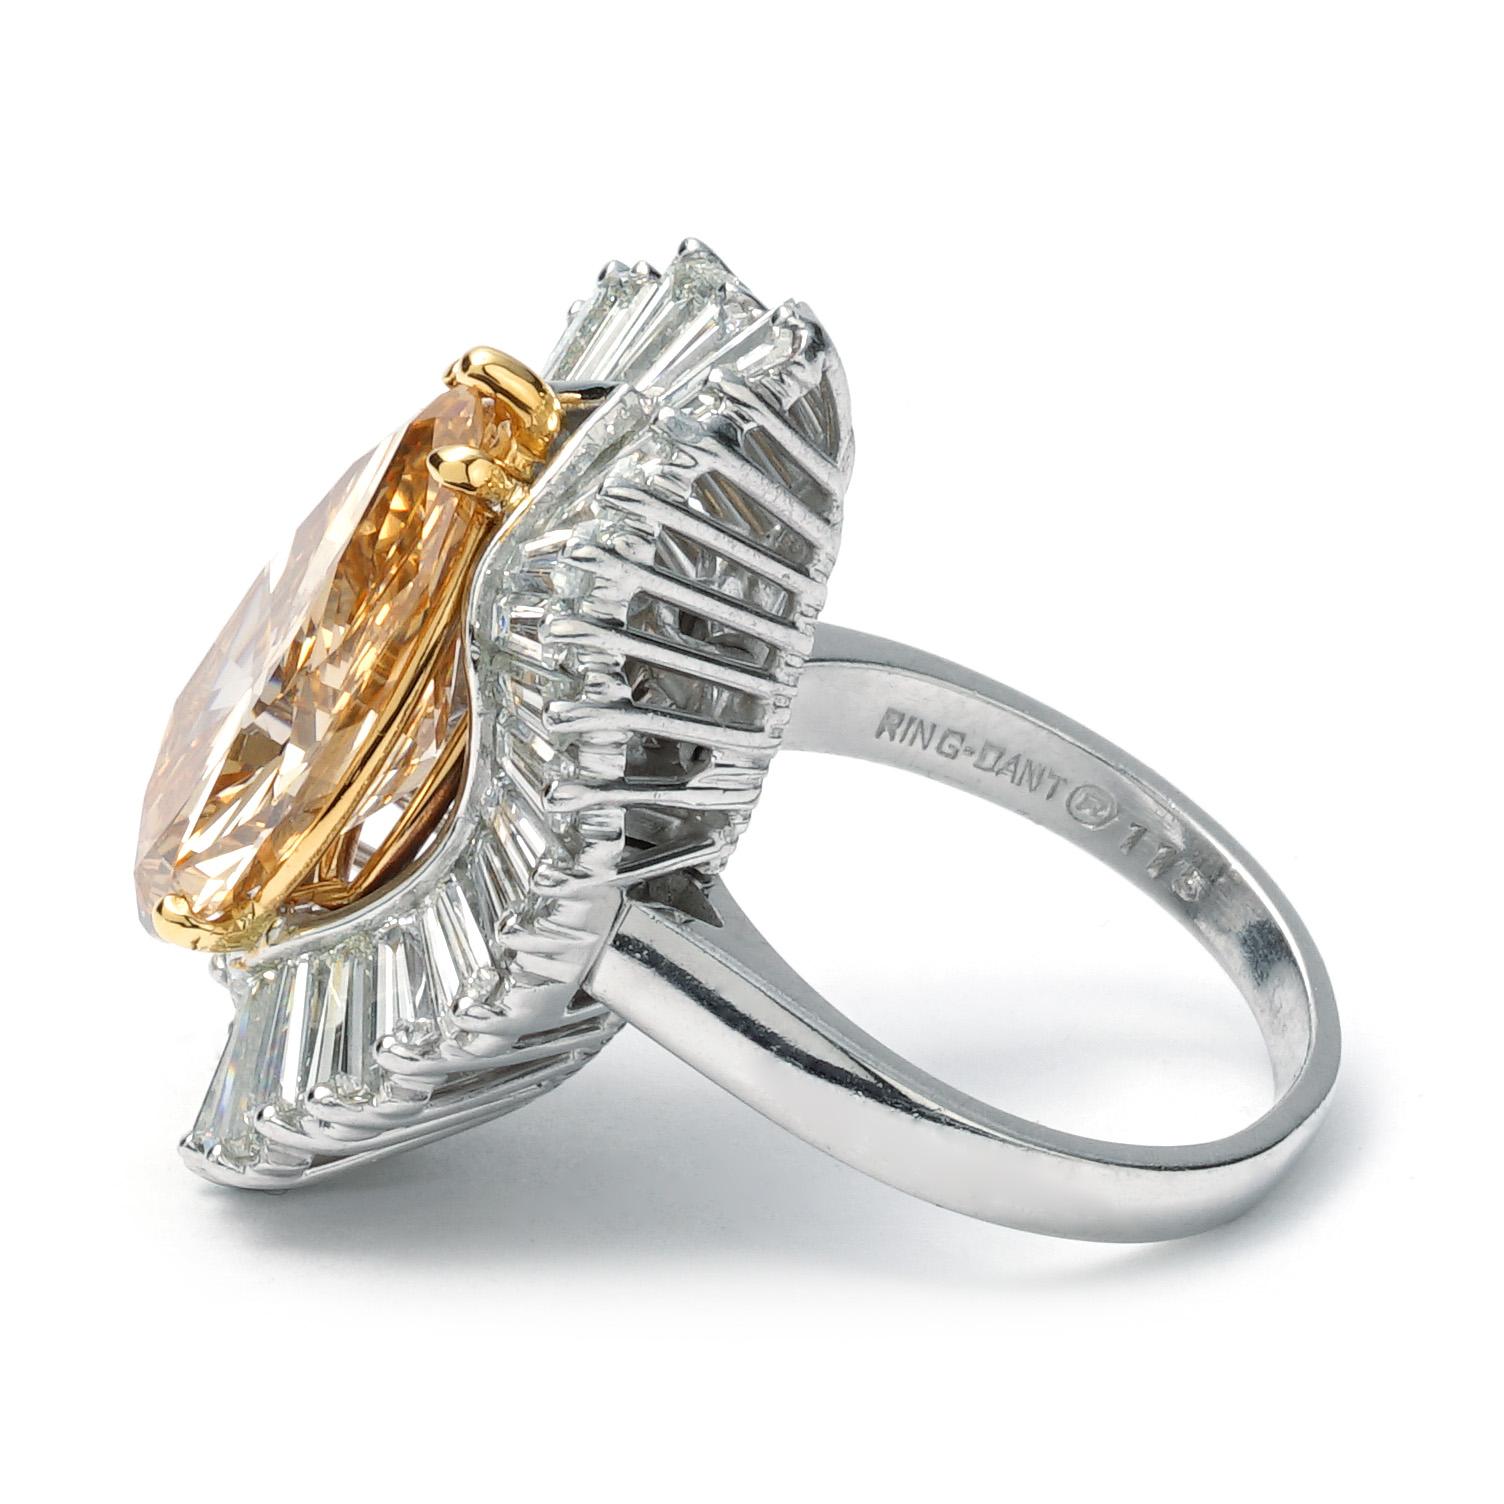 This New York Jewelers Signature ring is made of platinum and weighs 10.8 DWT (approx. 16.8 grams). It contains one GIA Certified pear shaped diamond weighing 6.28 CT with a fancy brownish yellow color, 36 tapered baguette G-H color and VS clarity